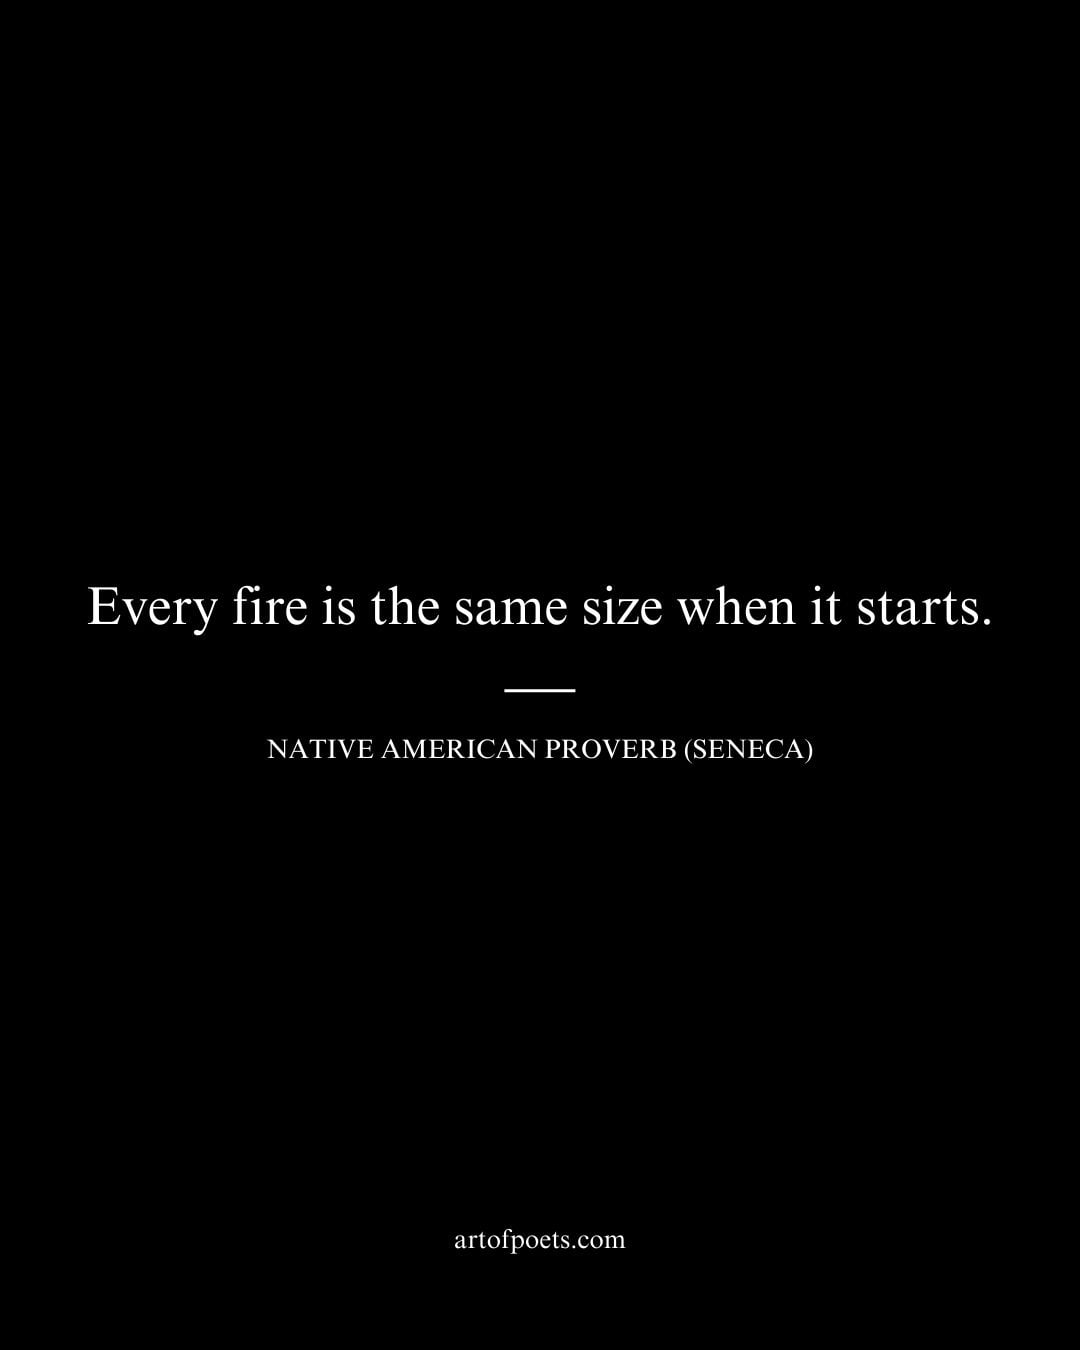 Every fire is the same size when it starts